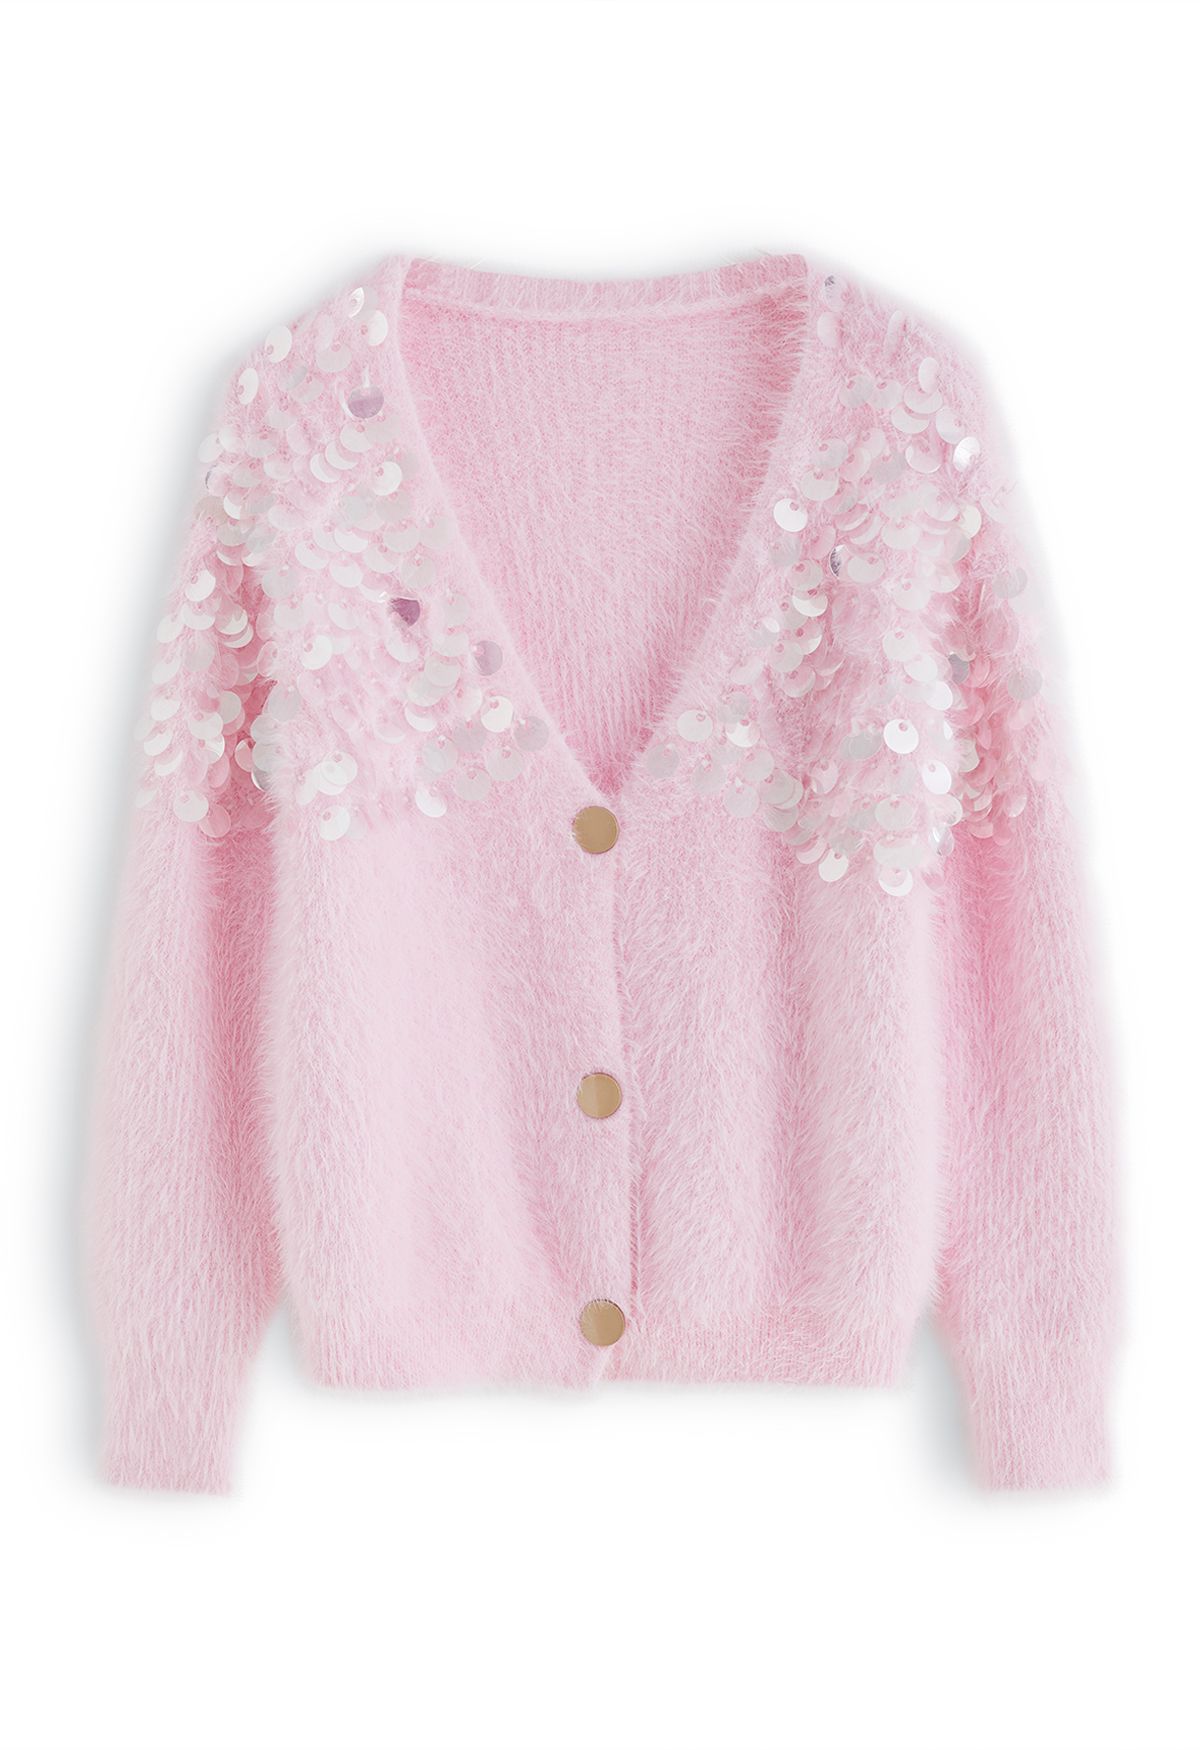 Indie Buttoned Fashion Cardigan in Fluffy Retro, - Sequins Pink Crop and Unique V-Neck